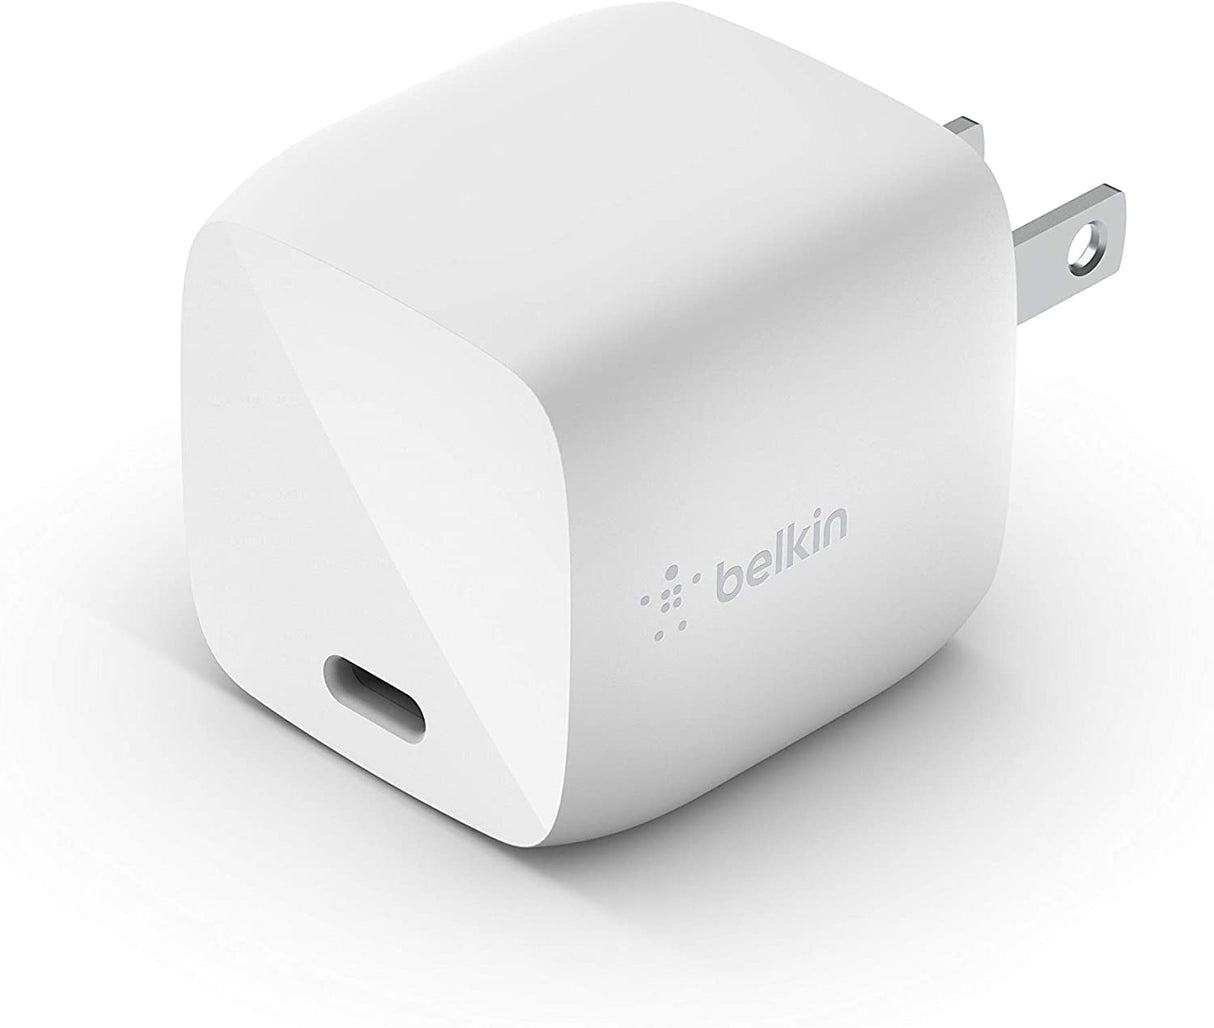 Belkin USB-PD GaN Charger 30W(USB-C Fast Charger for iPhone,MacBook Air,iPad Pro,Pixel, Galaxy, More) iPhone Fast Charger, USB-C Power Delivery with 1M(3.3ft) PVC USB-C to Lightning Cable (WCH001dq) Includes PVC USB-C to Lightning Cable